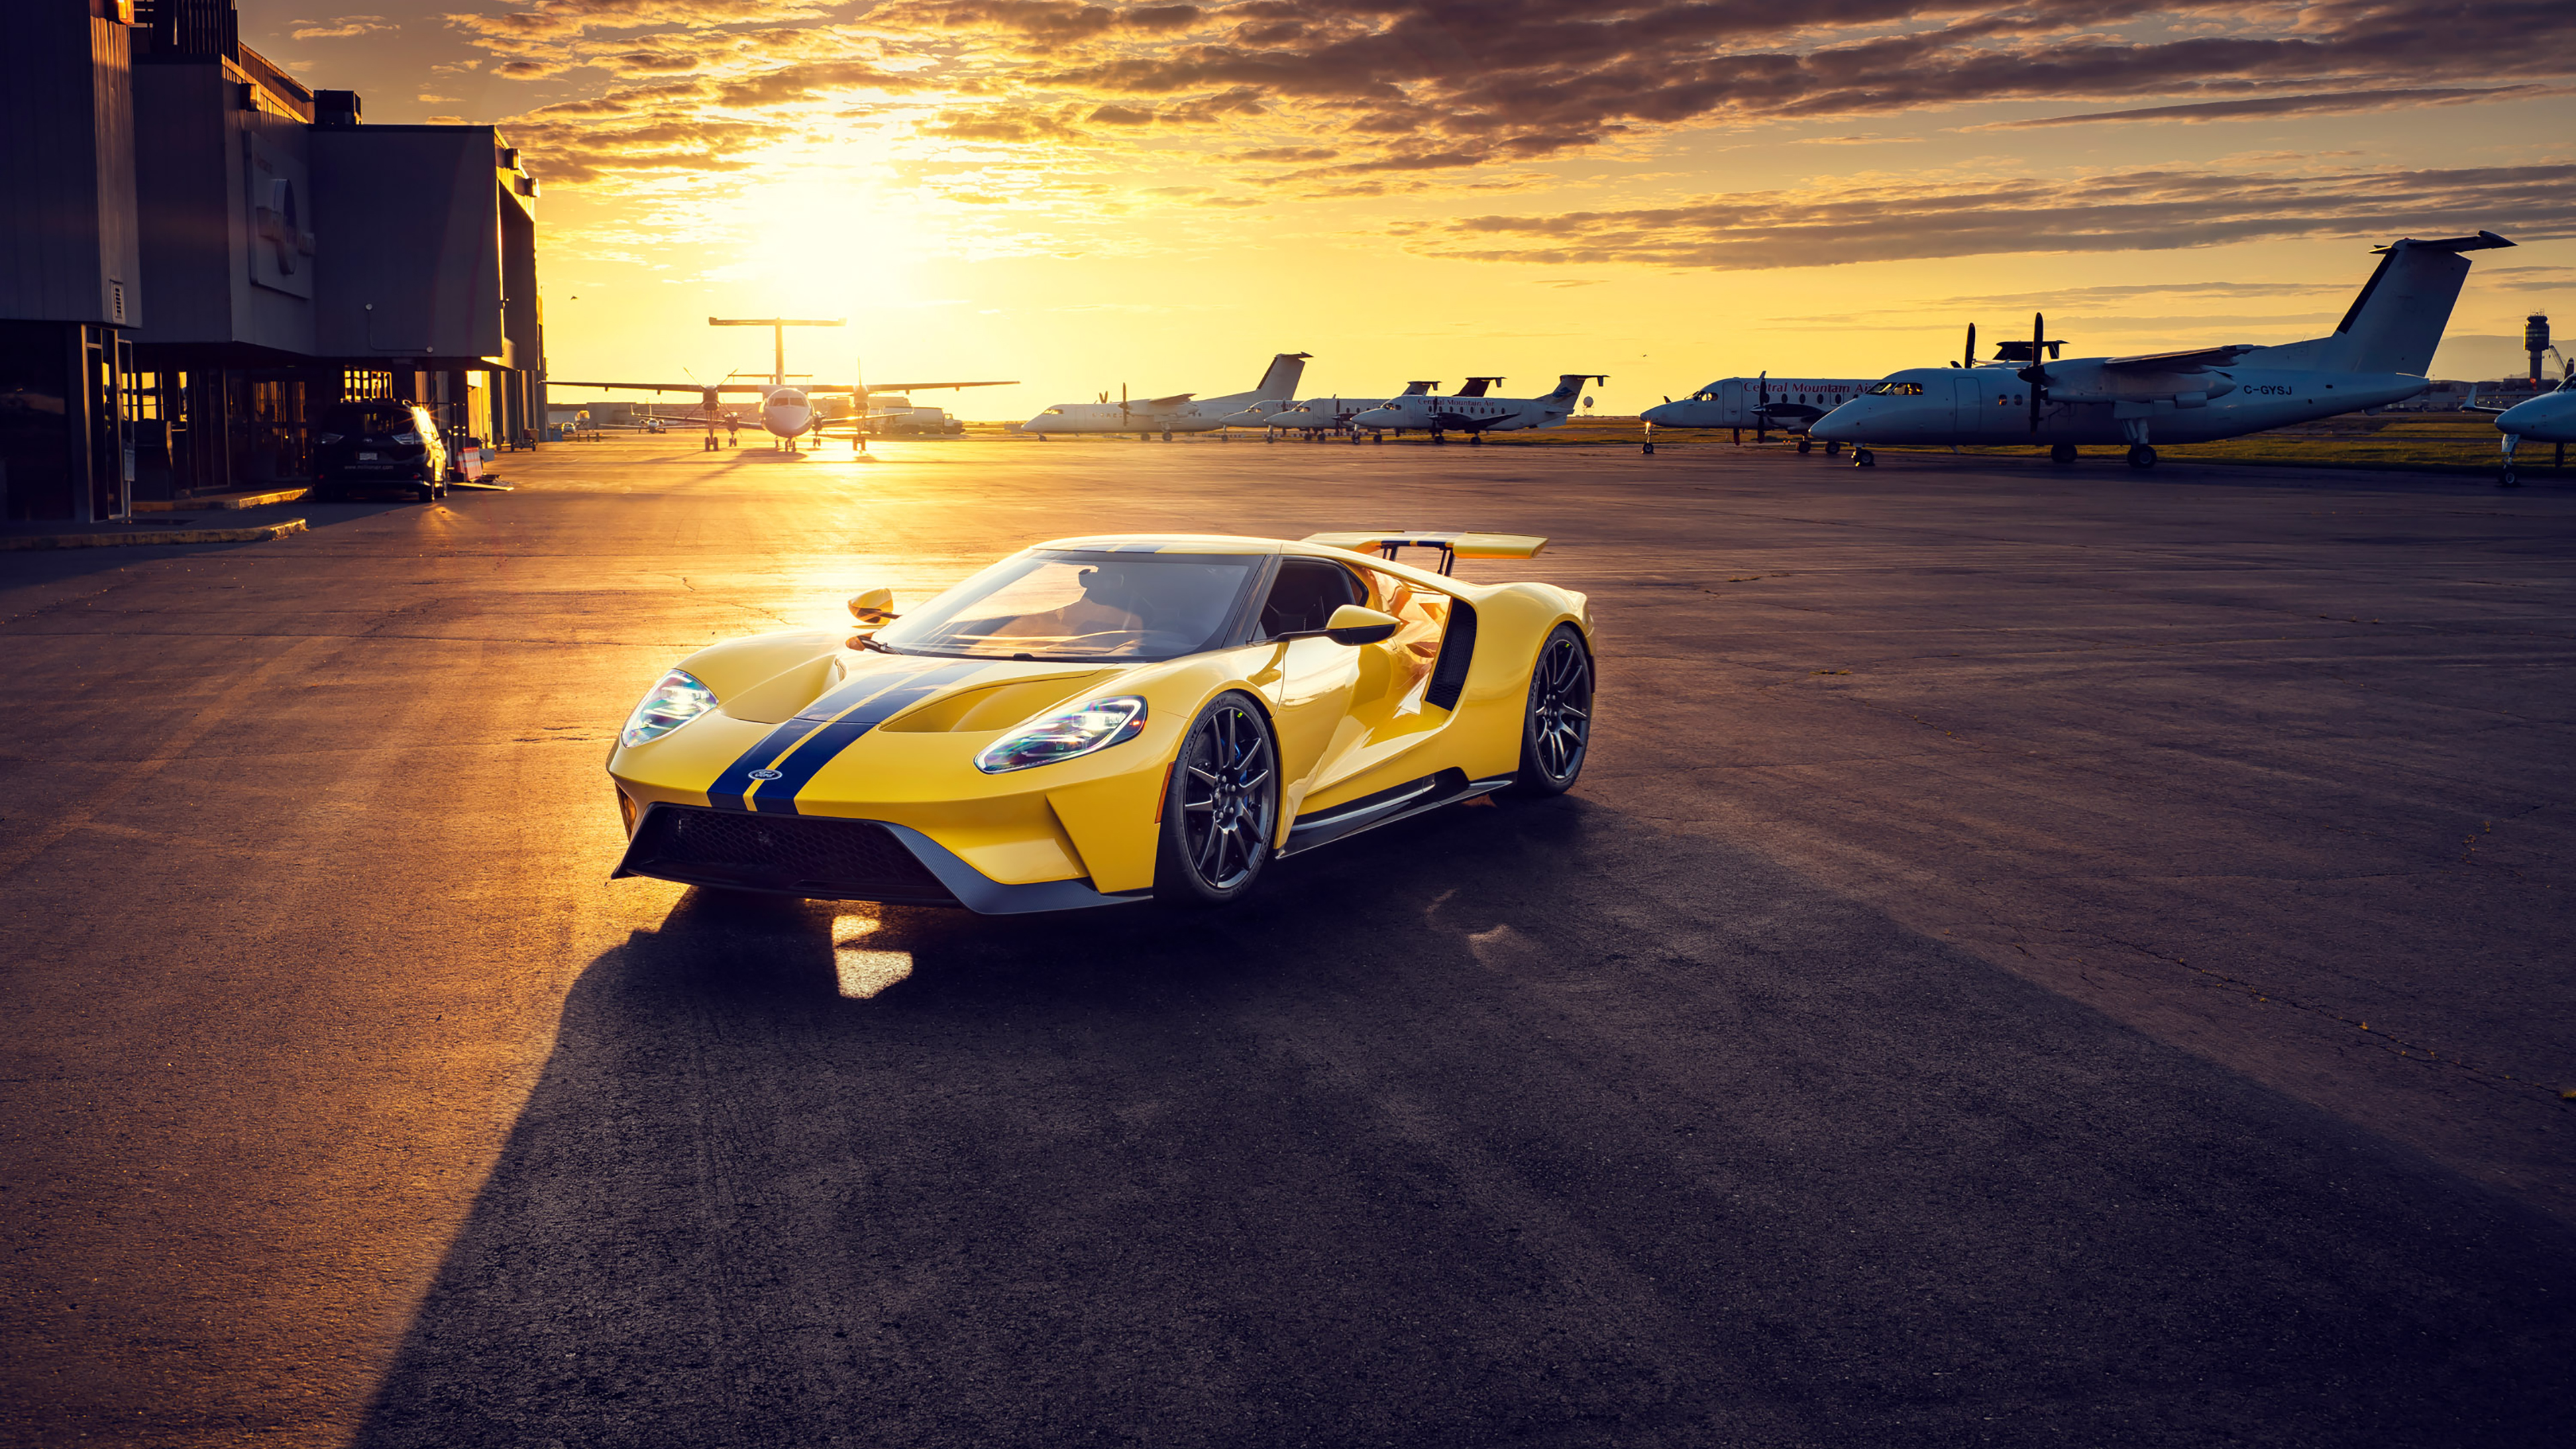 General 3840x2160 Ford GT car vehicle airport sunset aircraft yellow cars sunlight Ford GT Mk II supercars runway Ford American cars